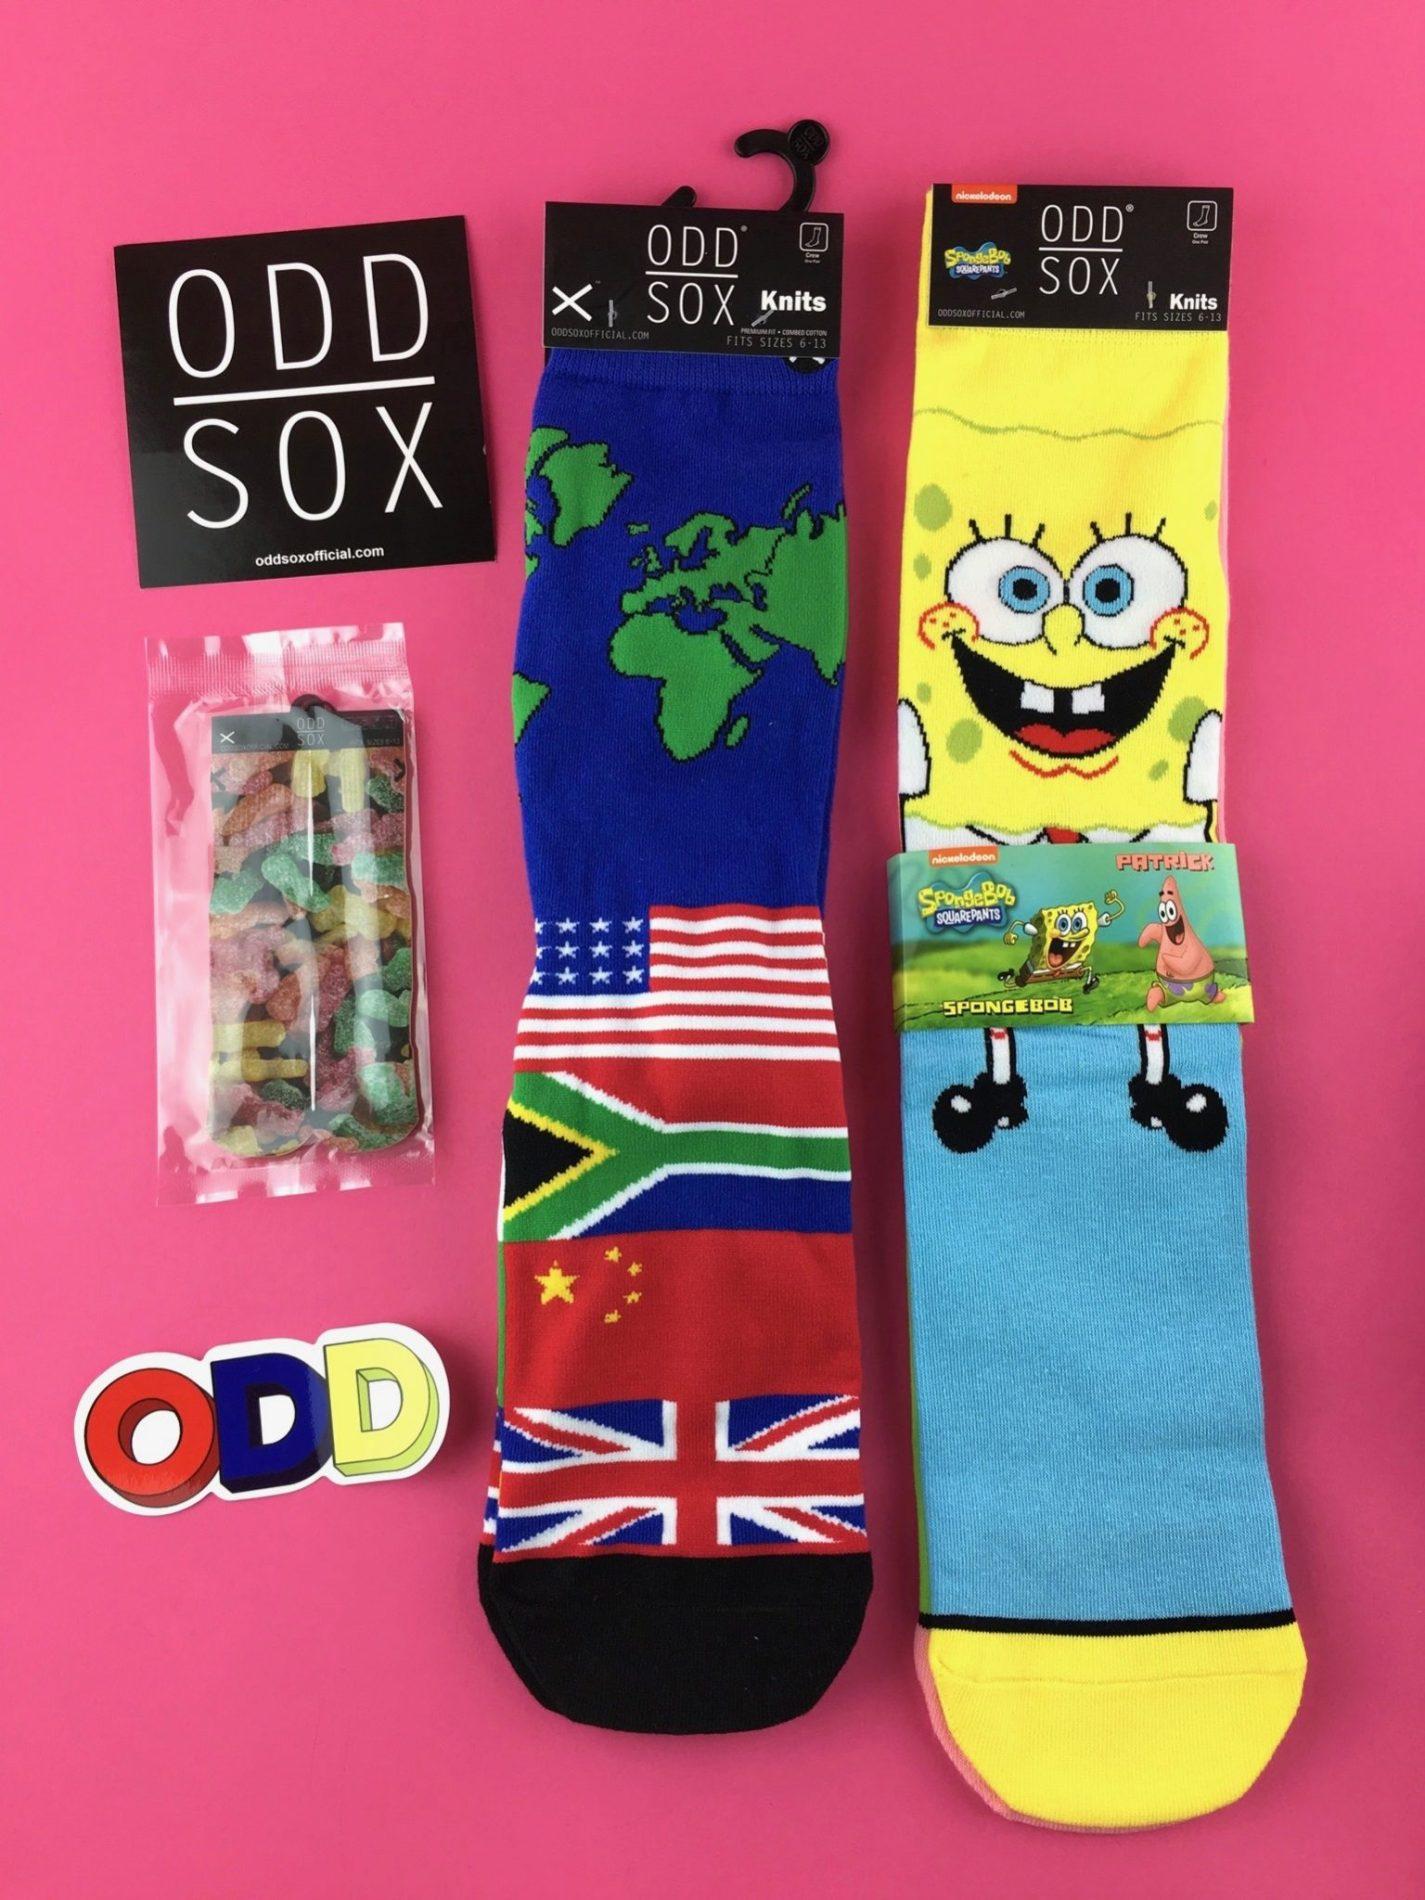 Odd Sox The Sox Box Review – February 2018